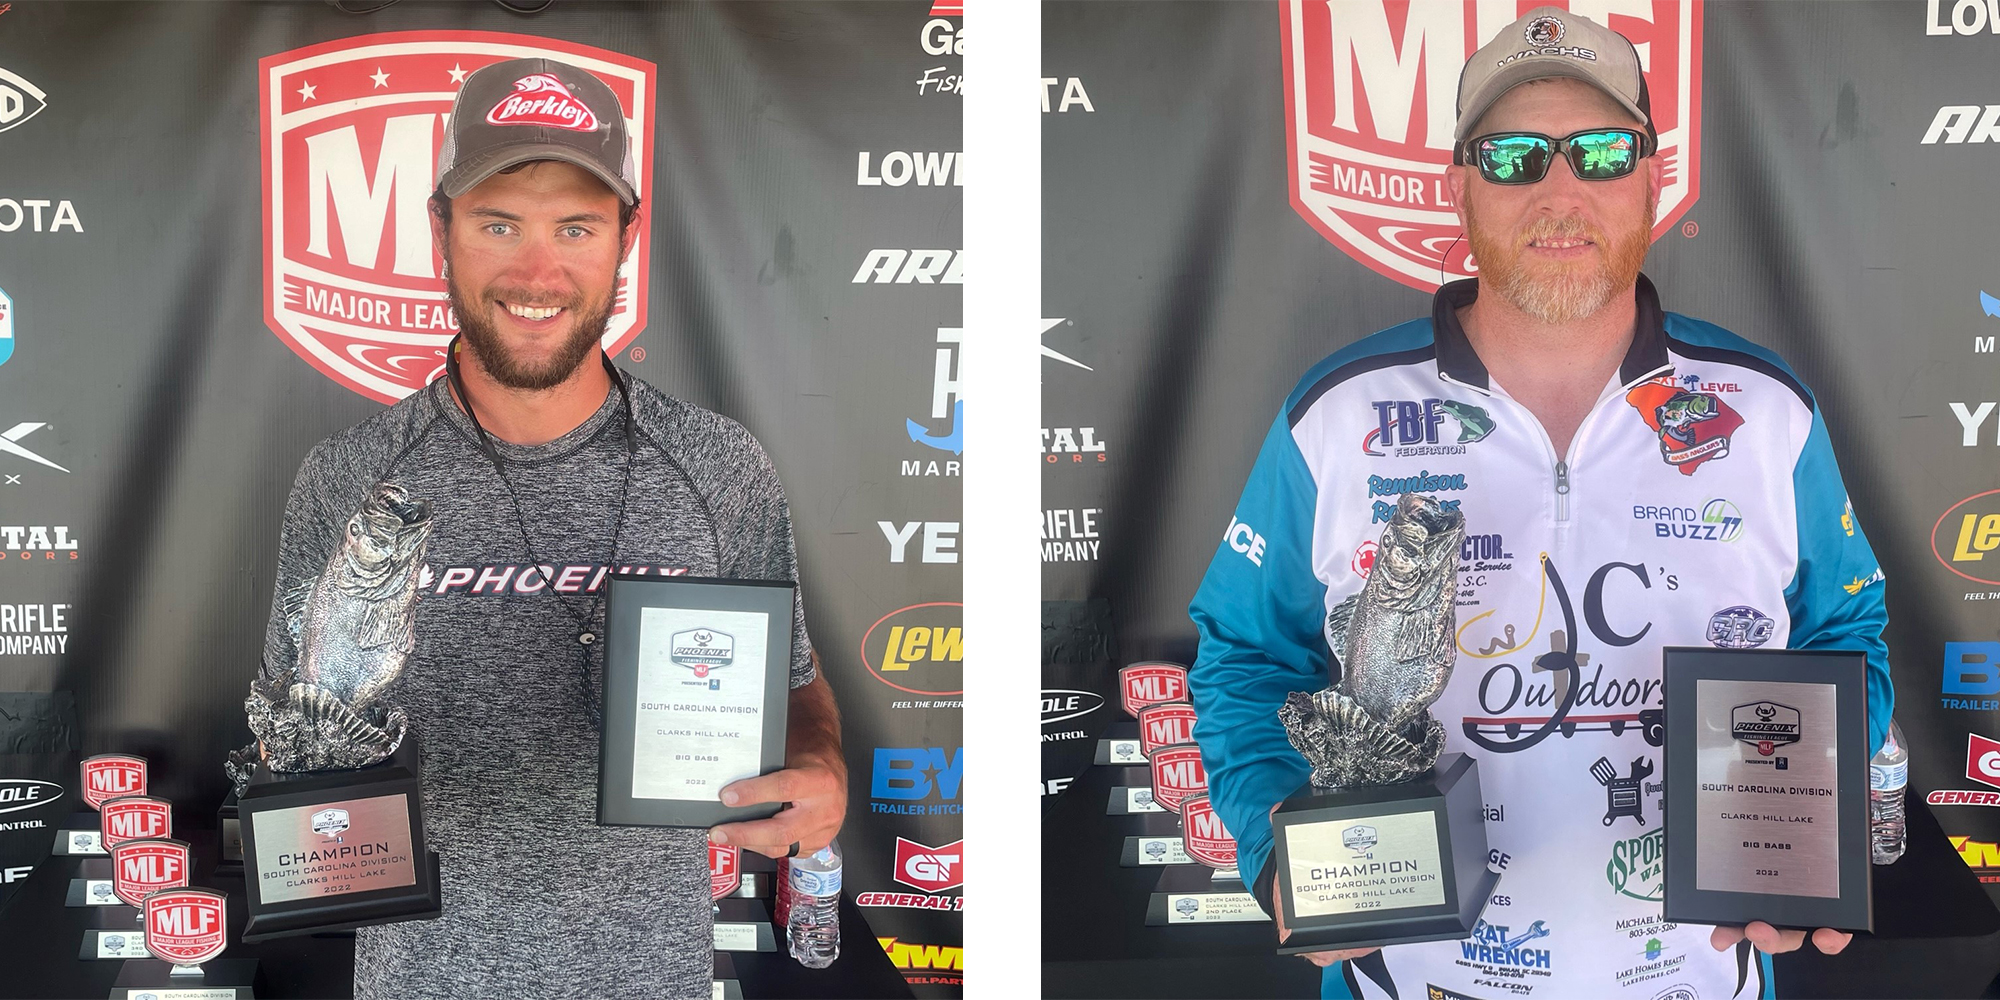 Top 10 baits from Clarks Hill - Major League Fishing